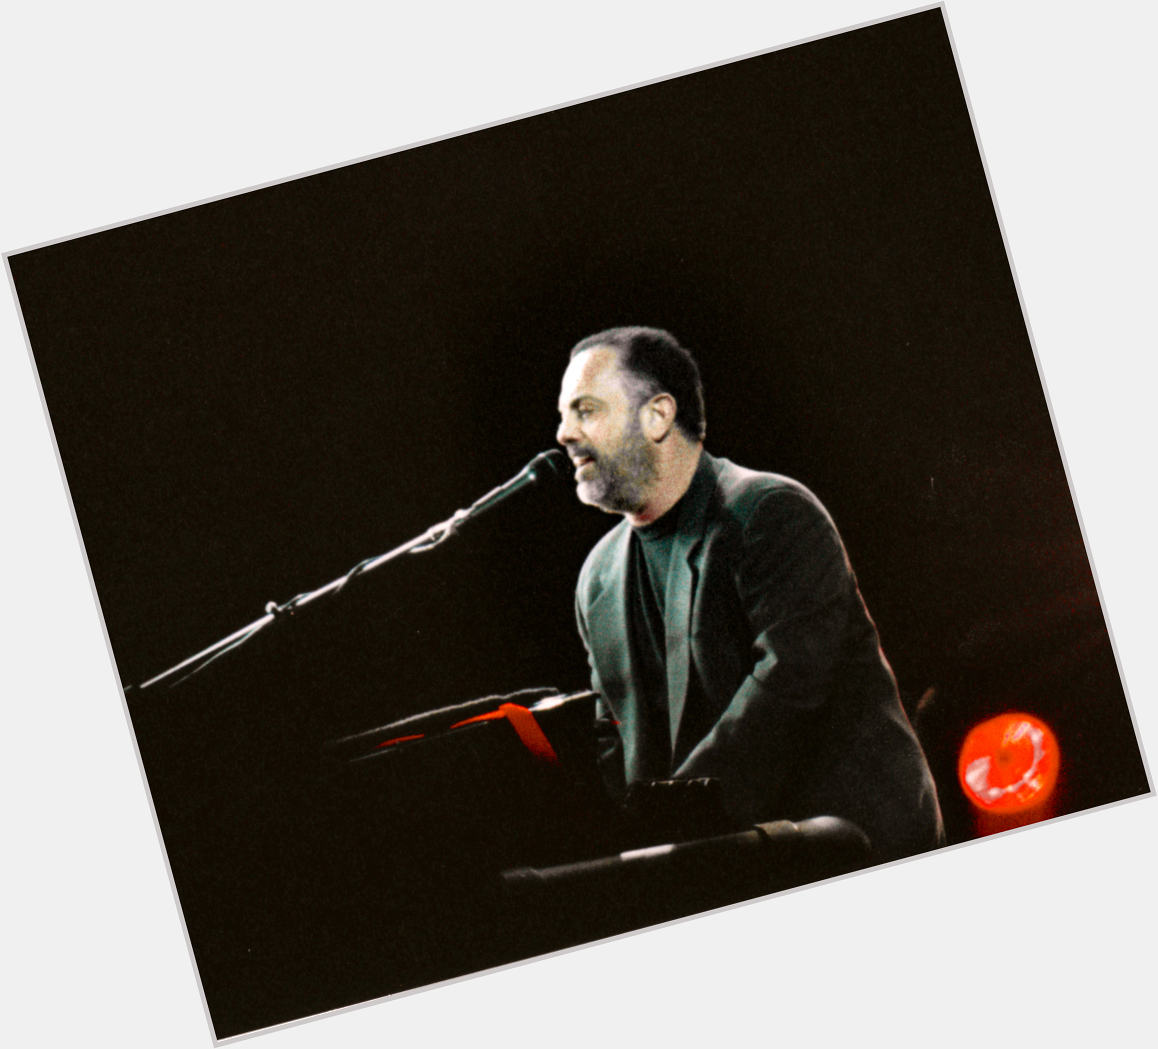 Happy birthday to the Piano Man himself, Billy Joel! I know a lot of you love his music. That man sure can play. 